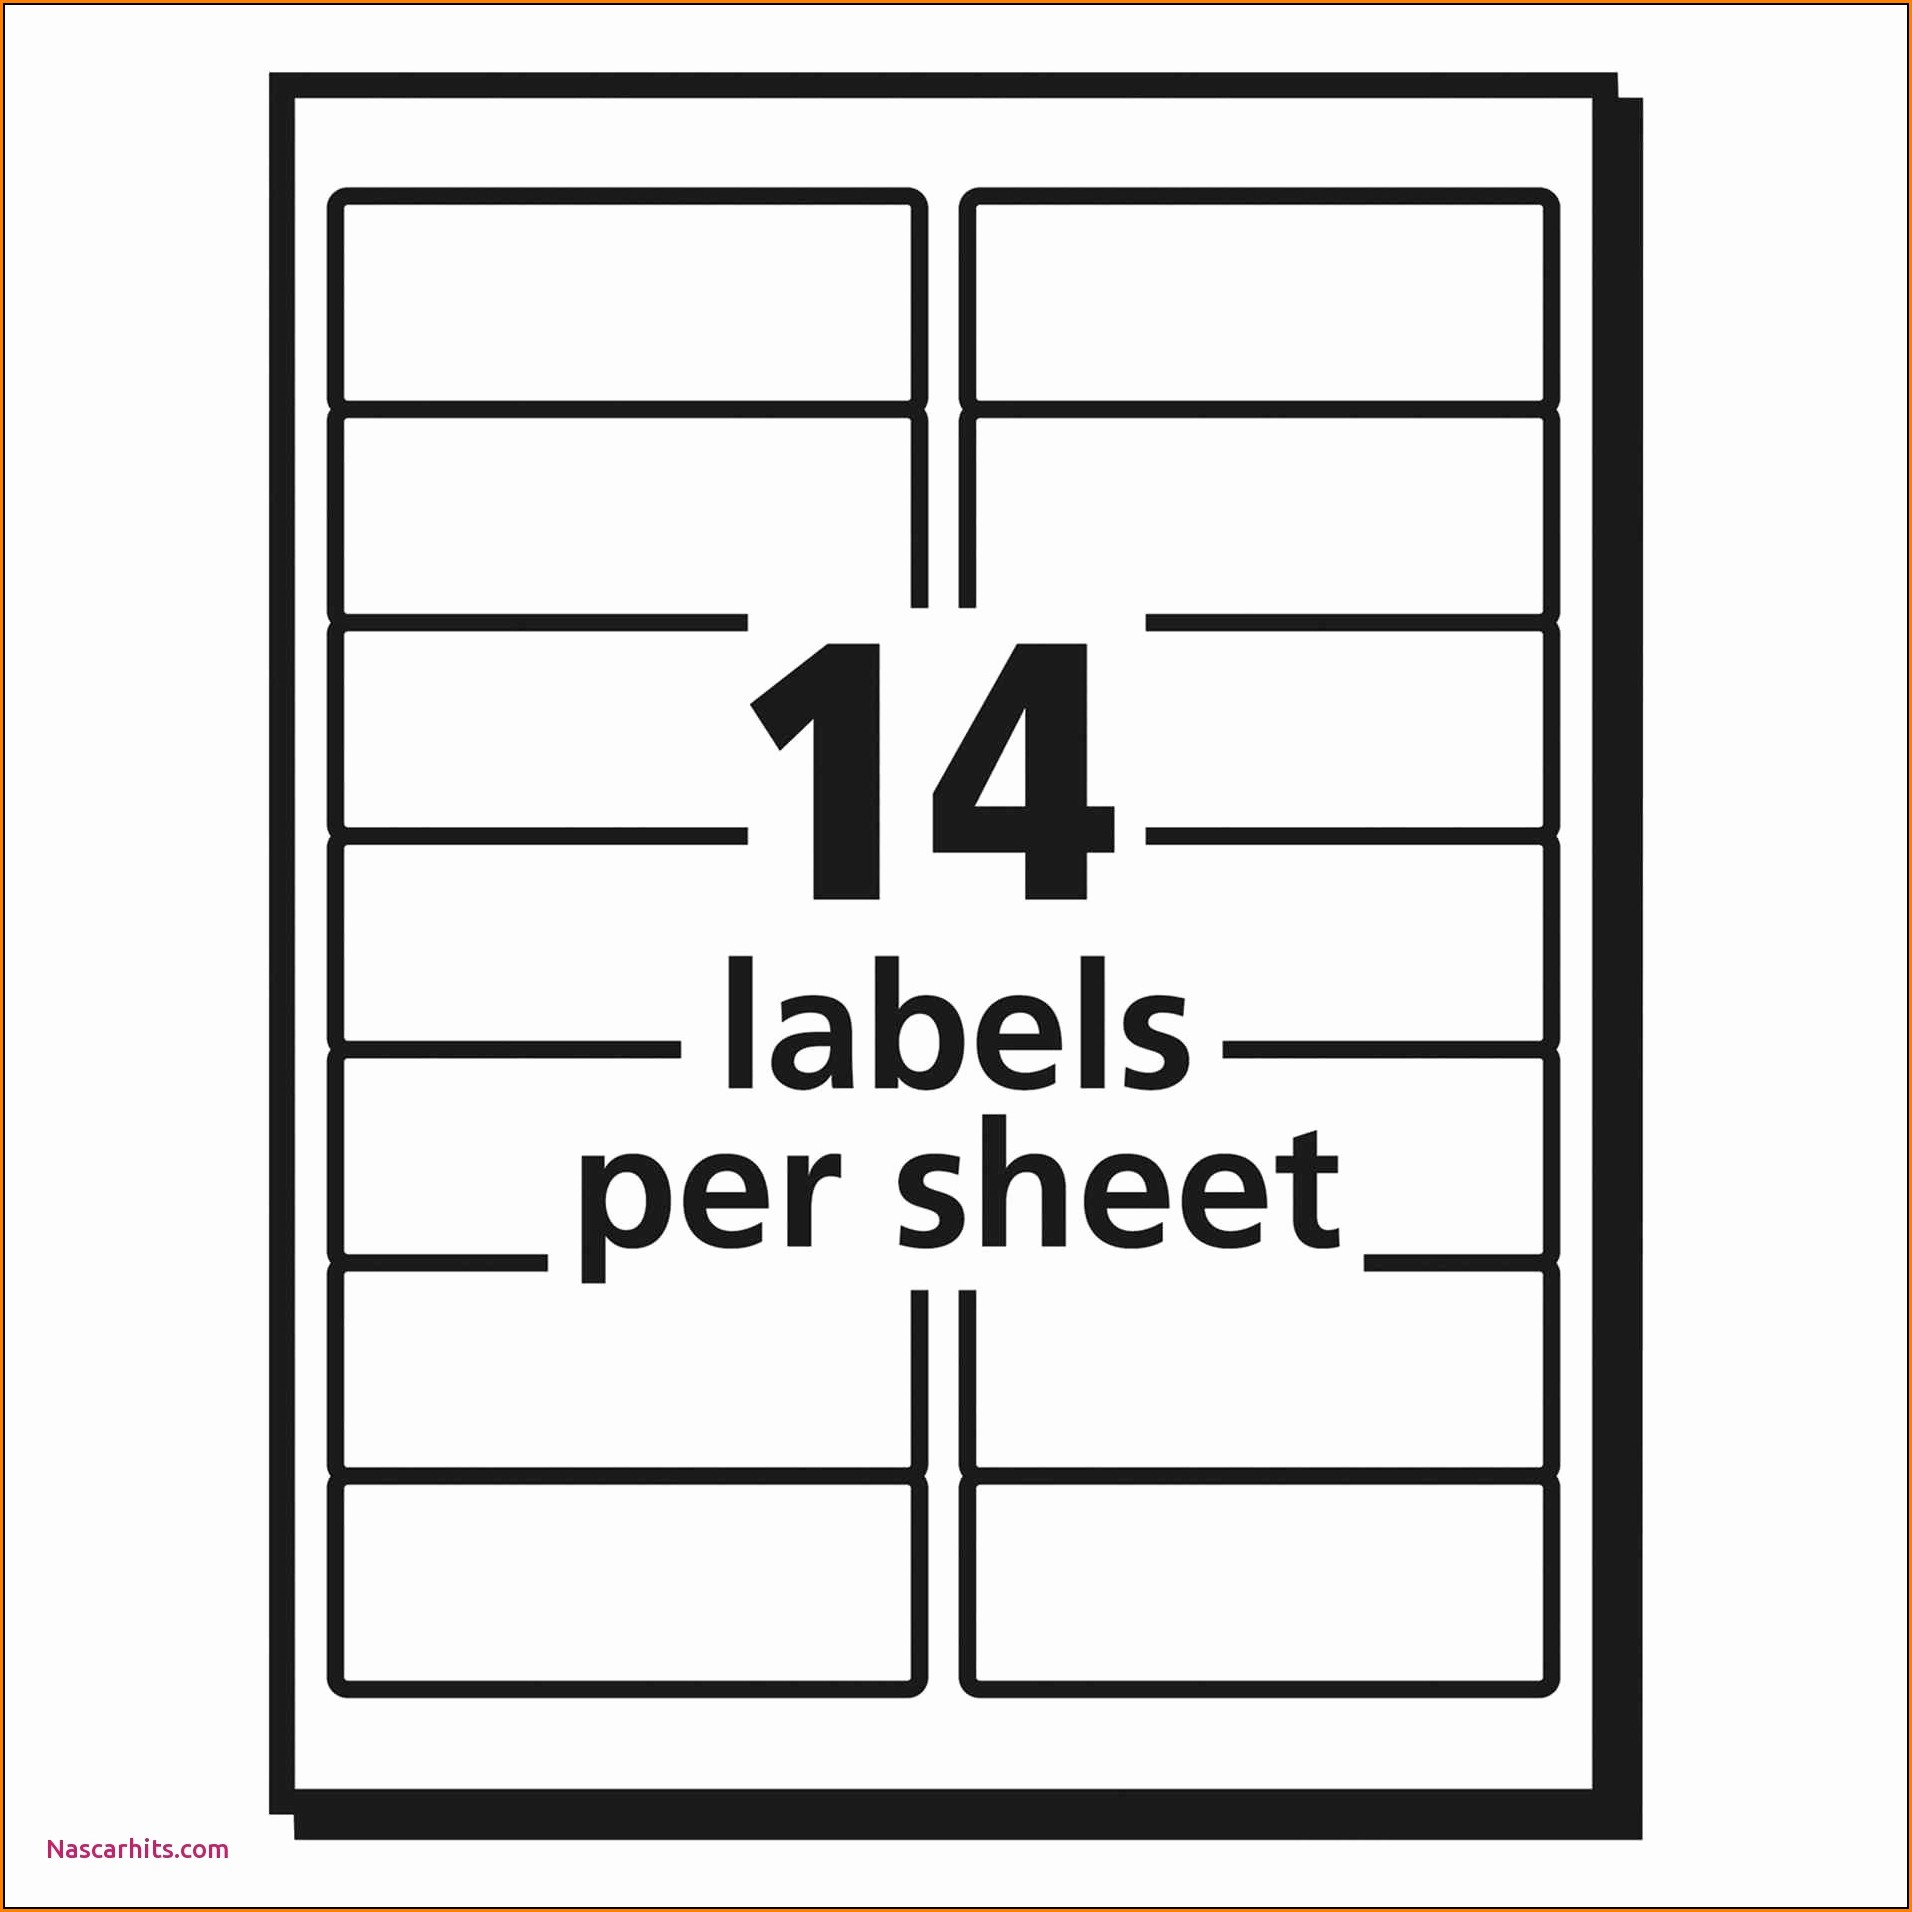 Avery File Cabinet Label Template